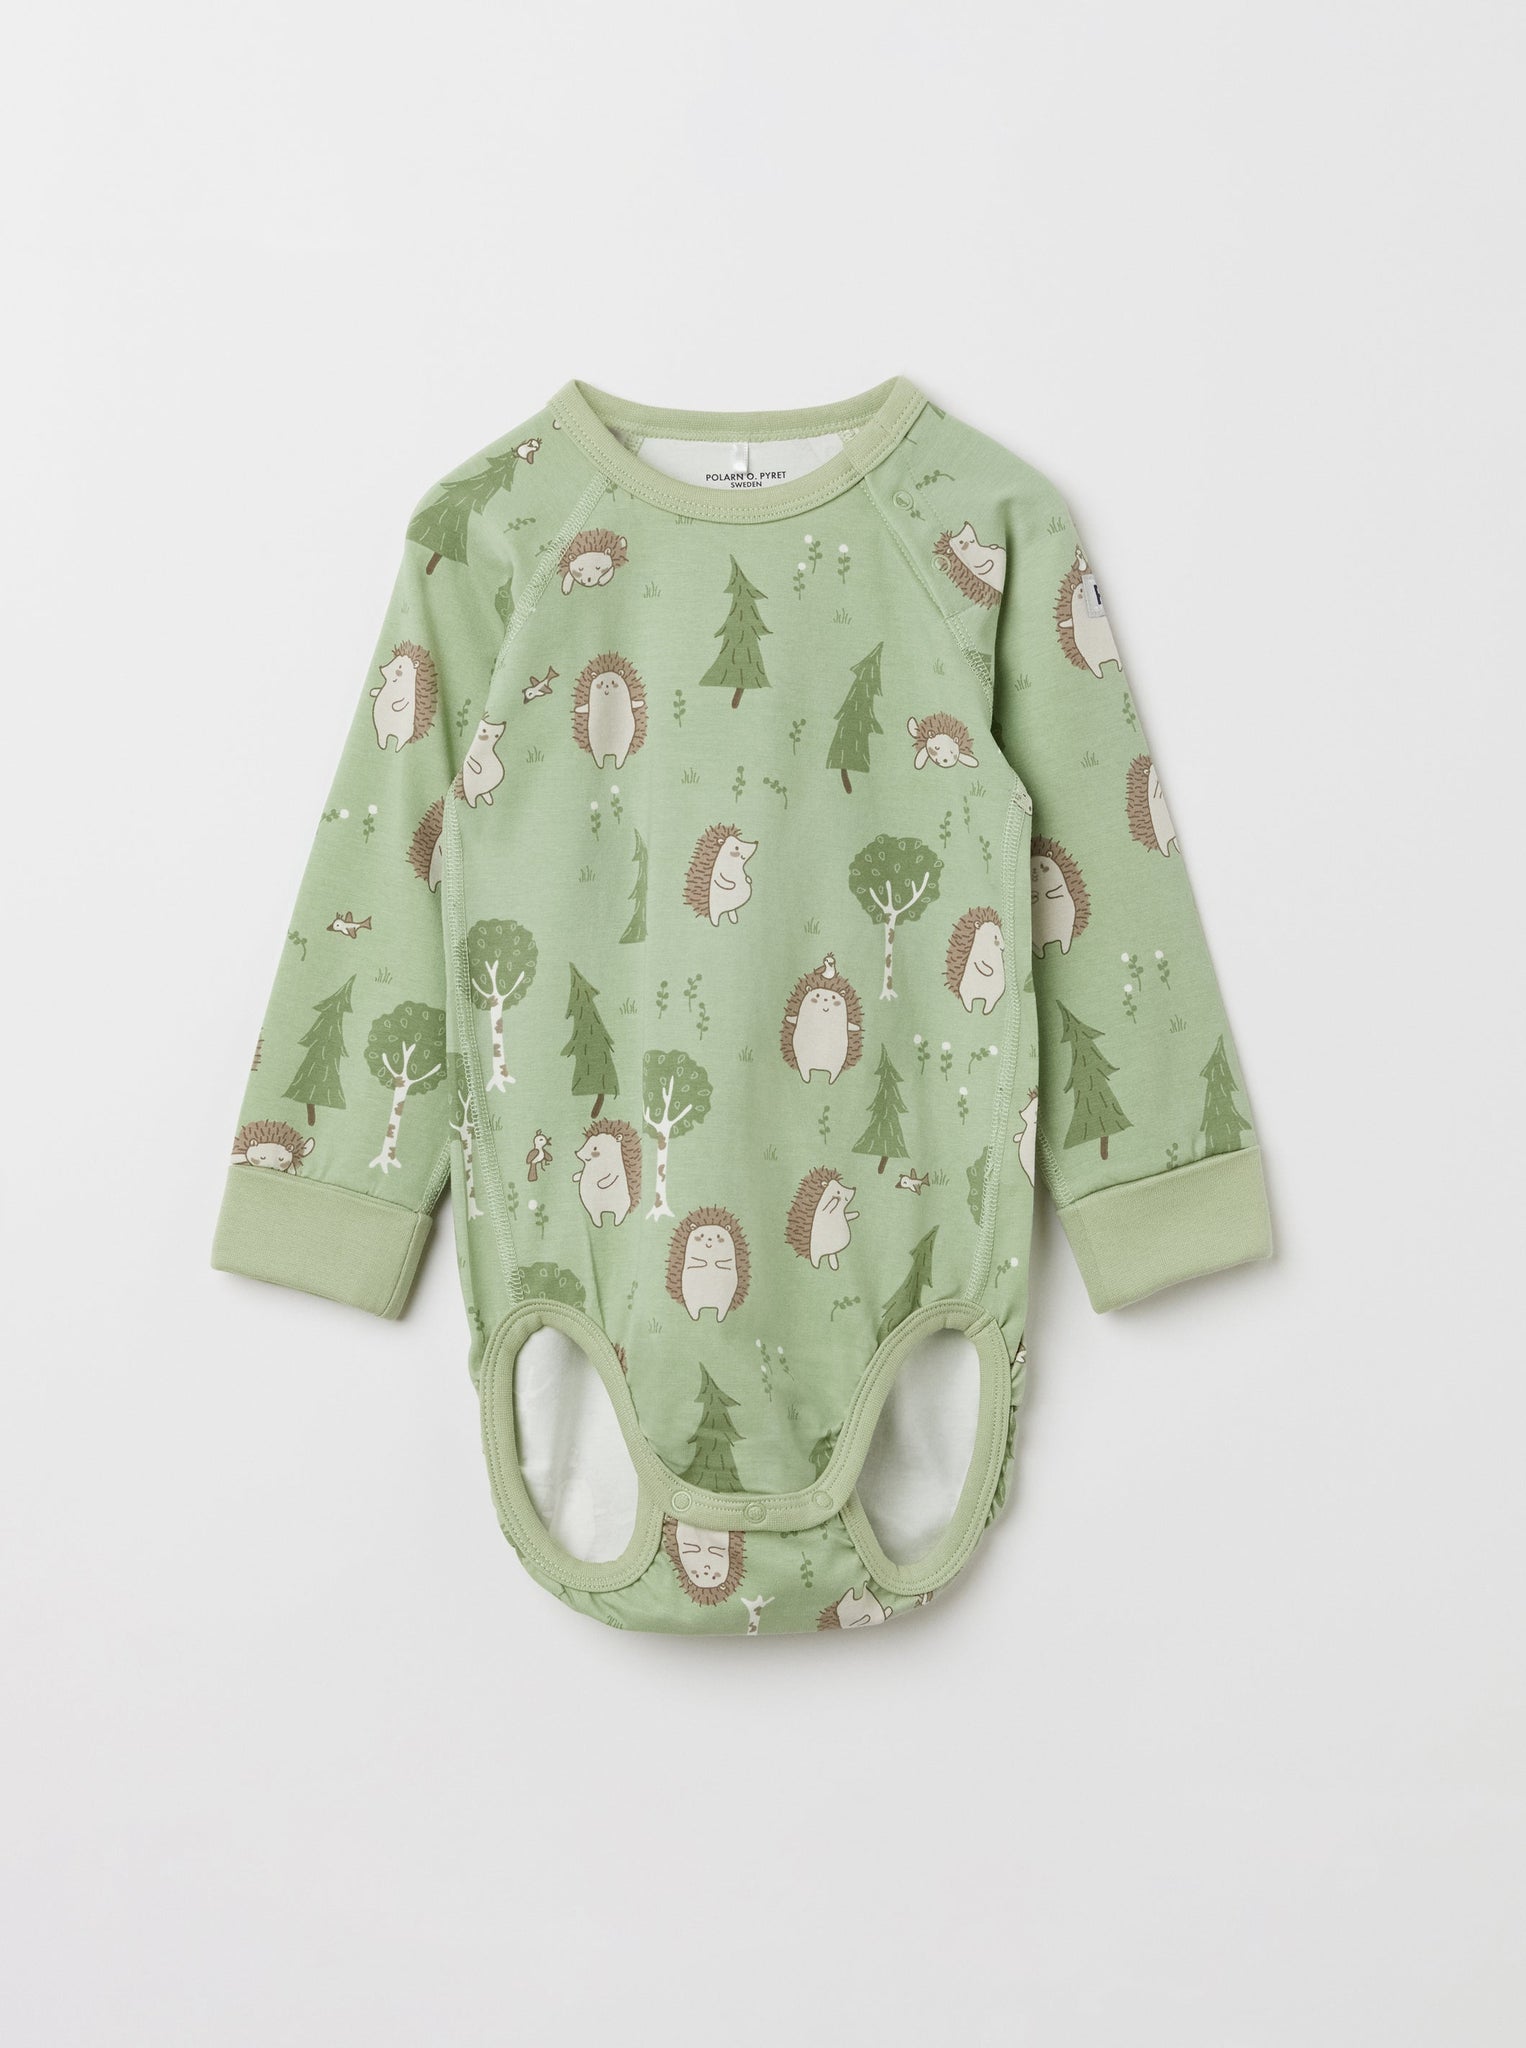 Hedgehog Organic Cotton Babygrow from the Polarn O. Pyret babywear collection. Nordic baby clothes made from sustainable sources.